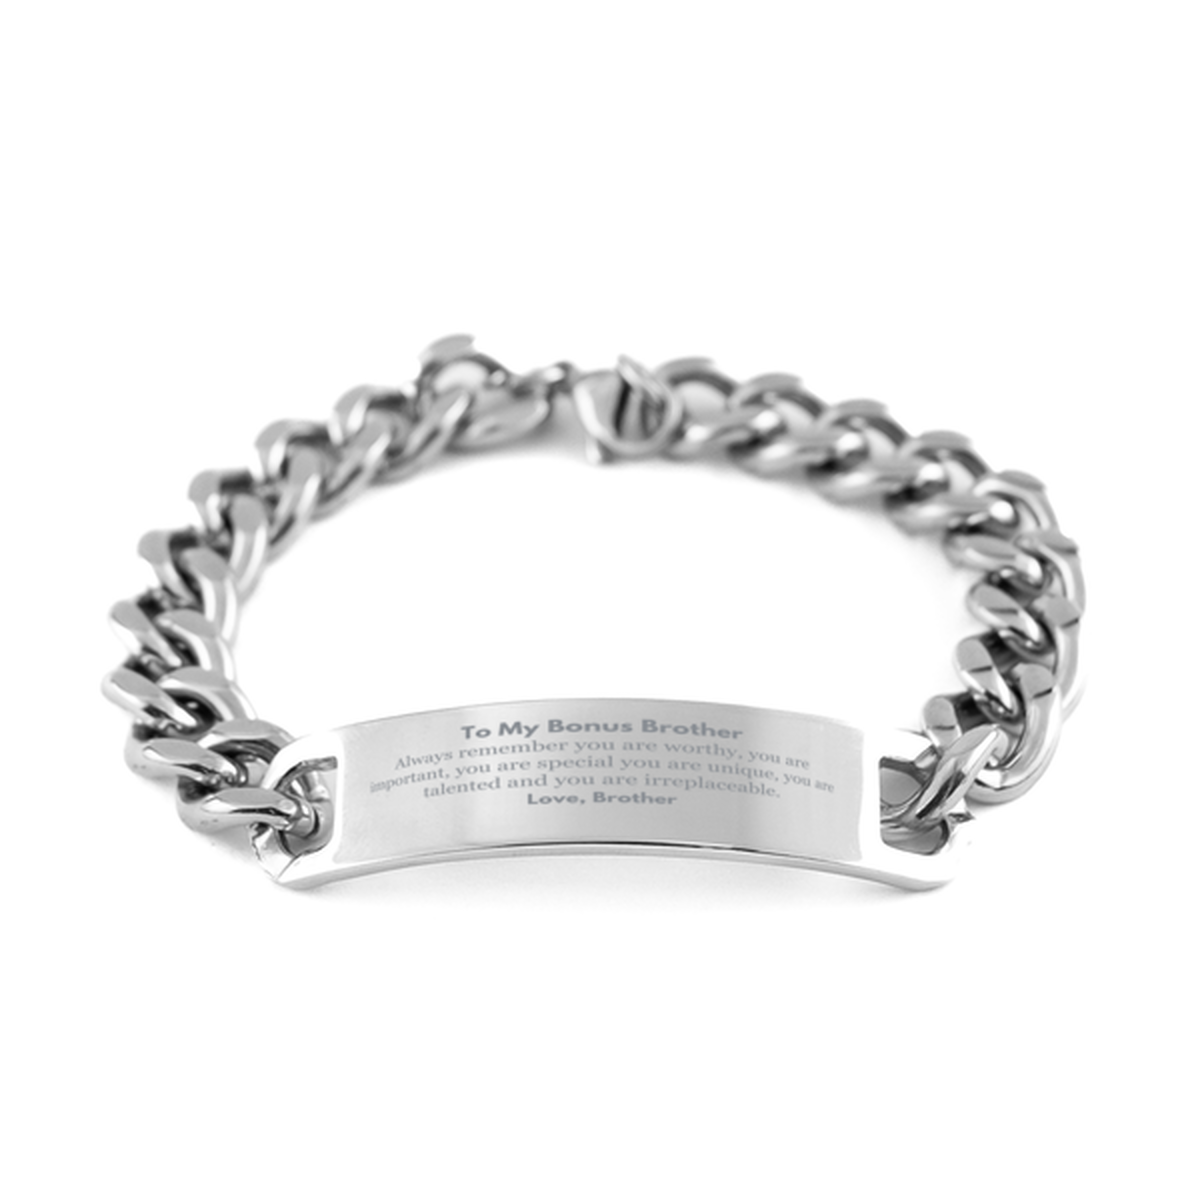 Bonus Brother Birthday Gifts from Brother, Inspirational Cuban Chain Stainless Steel Bracelet for Bonus Brother Christmas Graduation Gifts for Bonus Brother Always remember you are worthy, you are important. Love, Brother